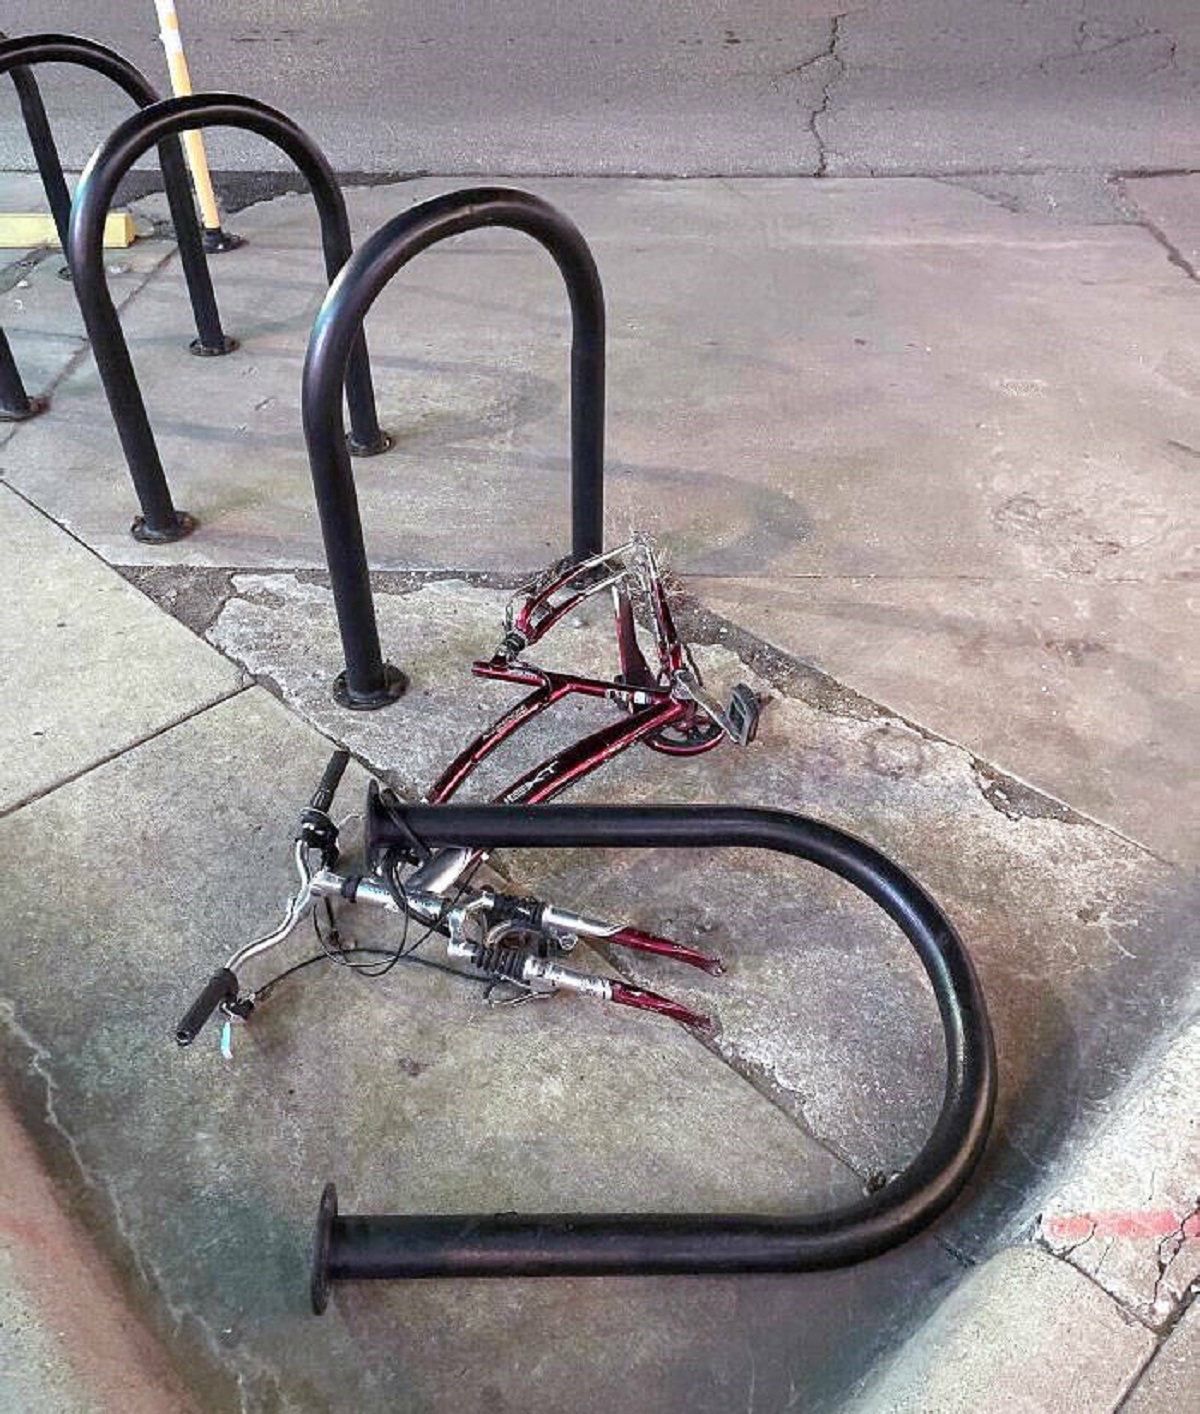 "Somebody Unbolted The Whole Bike Rack In An Attempt To Steal My Bike. When The Lock Didn't Fit, They Just Stole The Tires Instead"